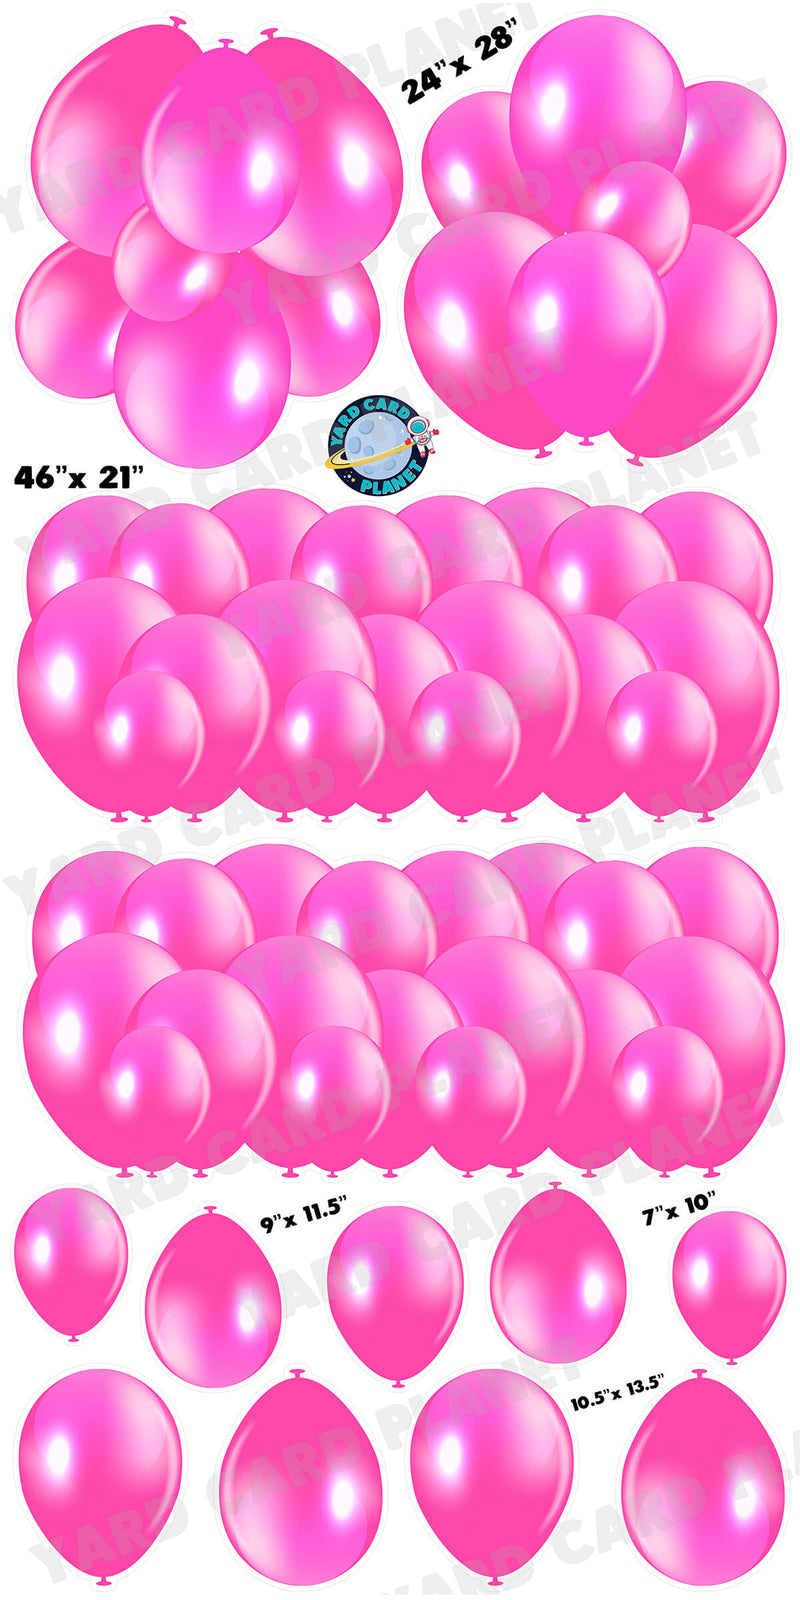 Neon Pink Balloon Panels, Bouquets and Singles Yard Card Set